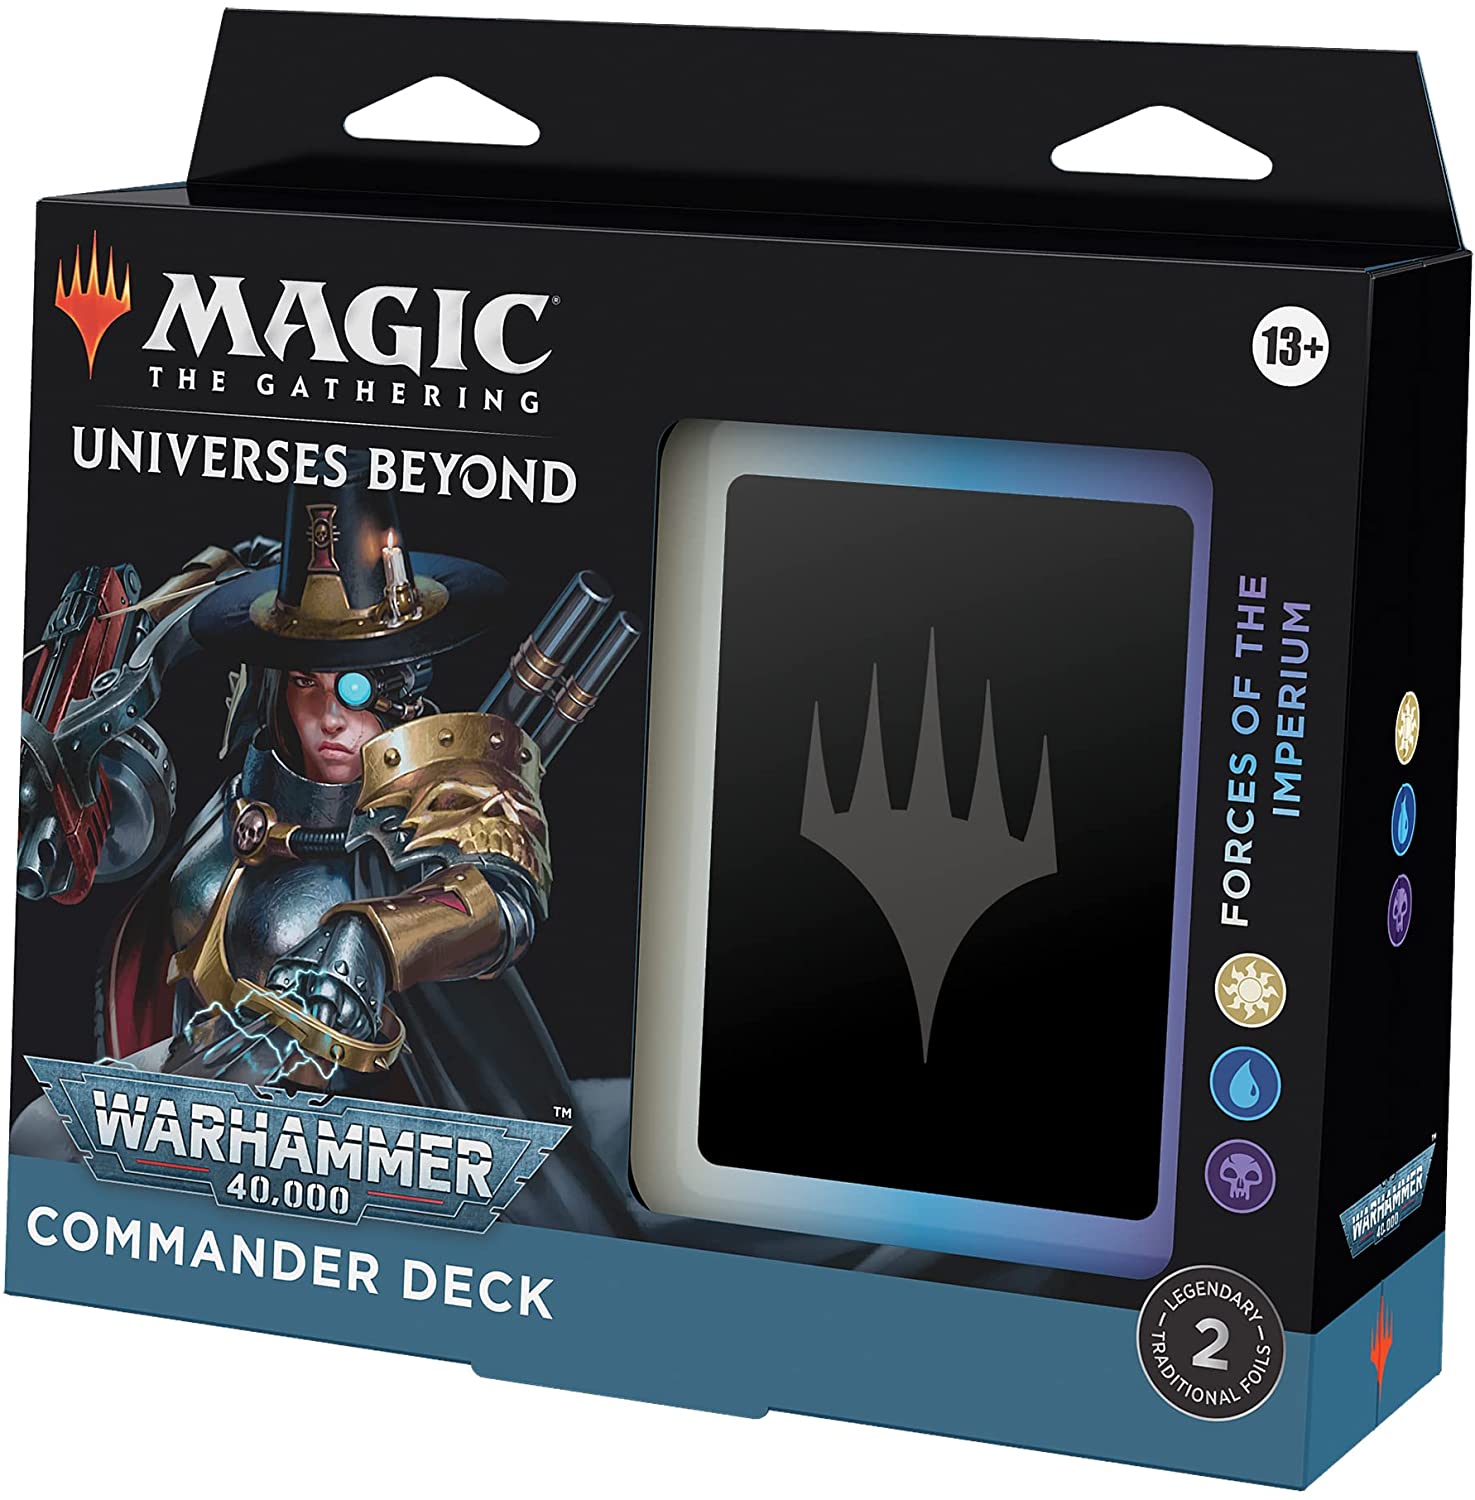 Magic: Warhammer 40.000 Commander Deck - Forces of the Imperium